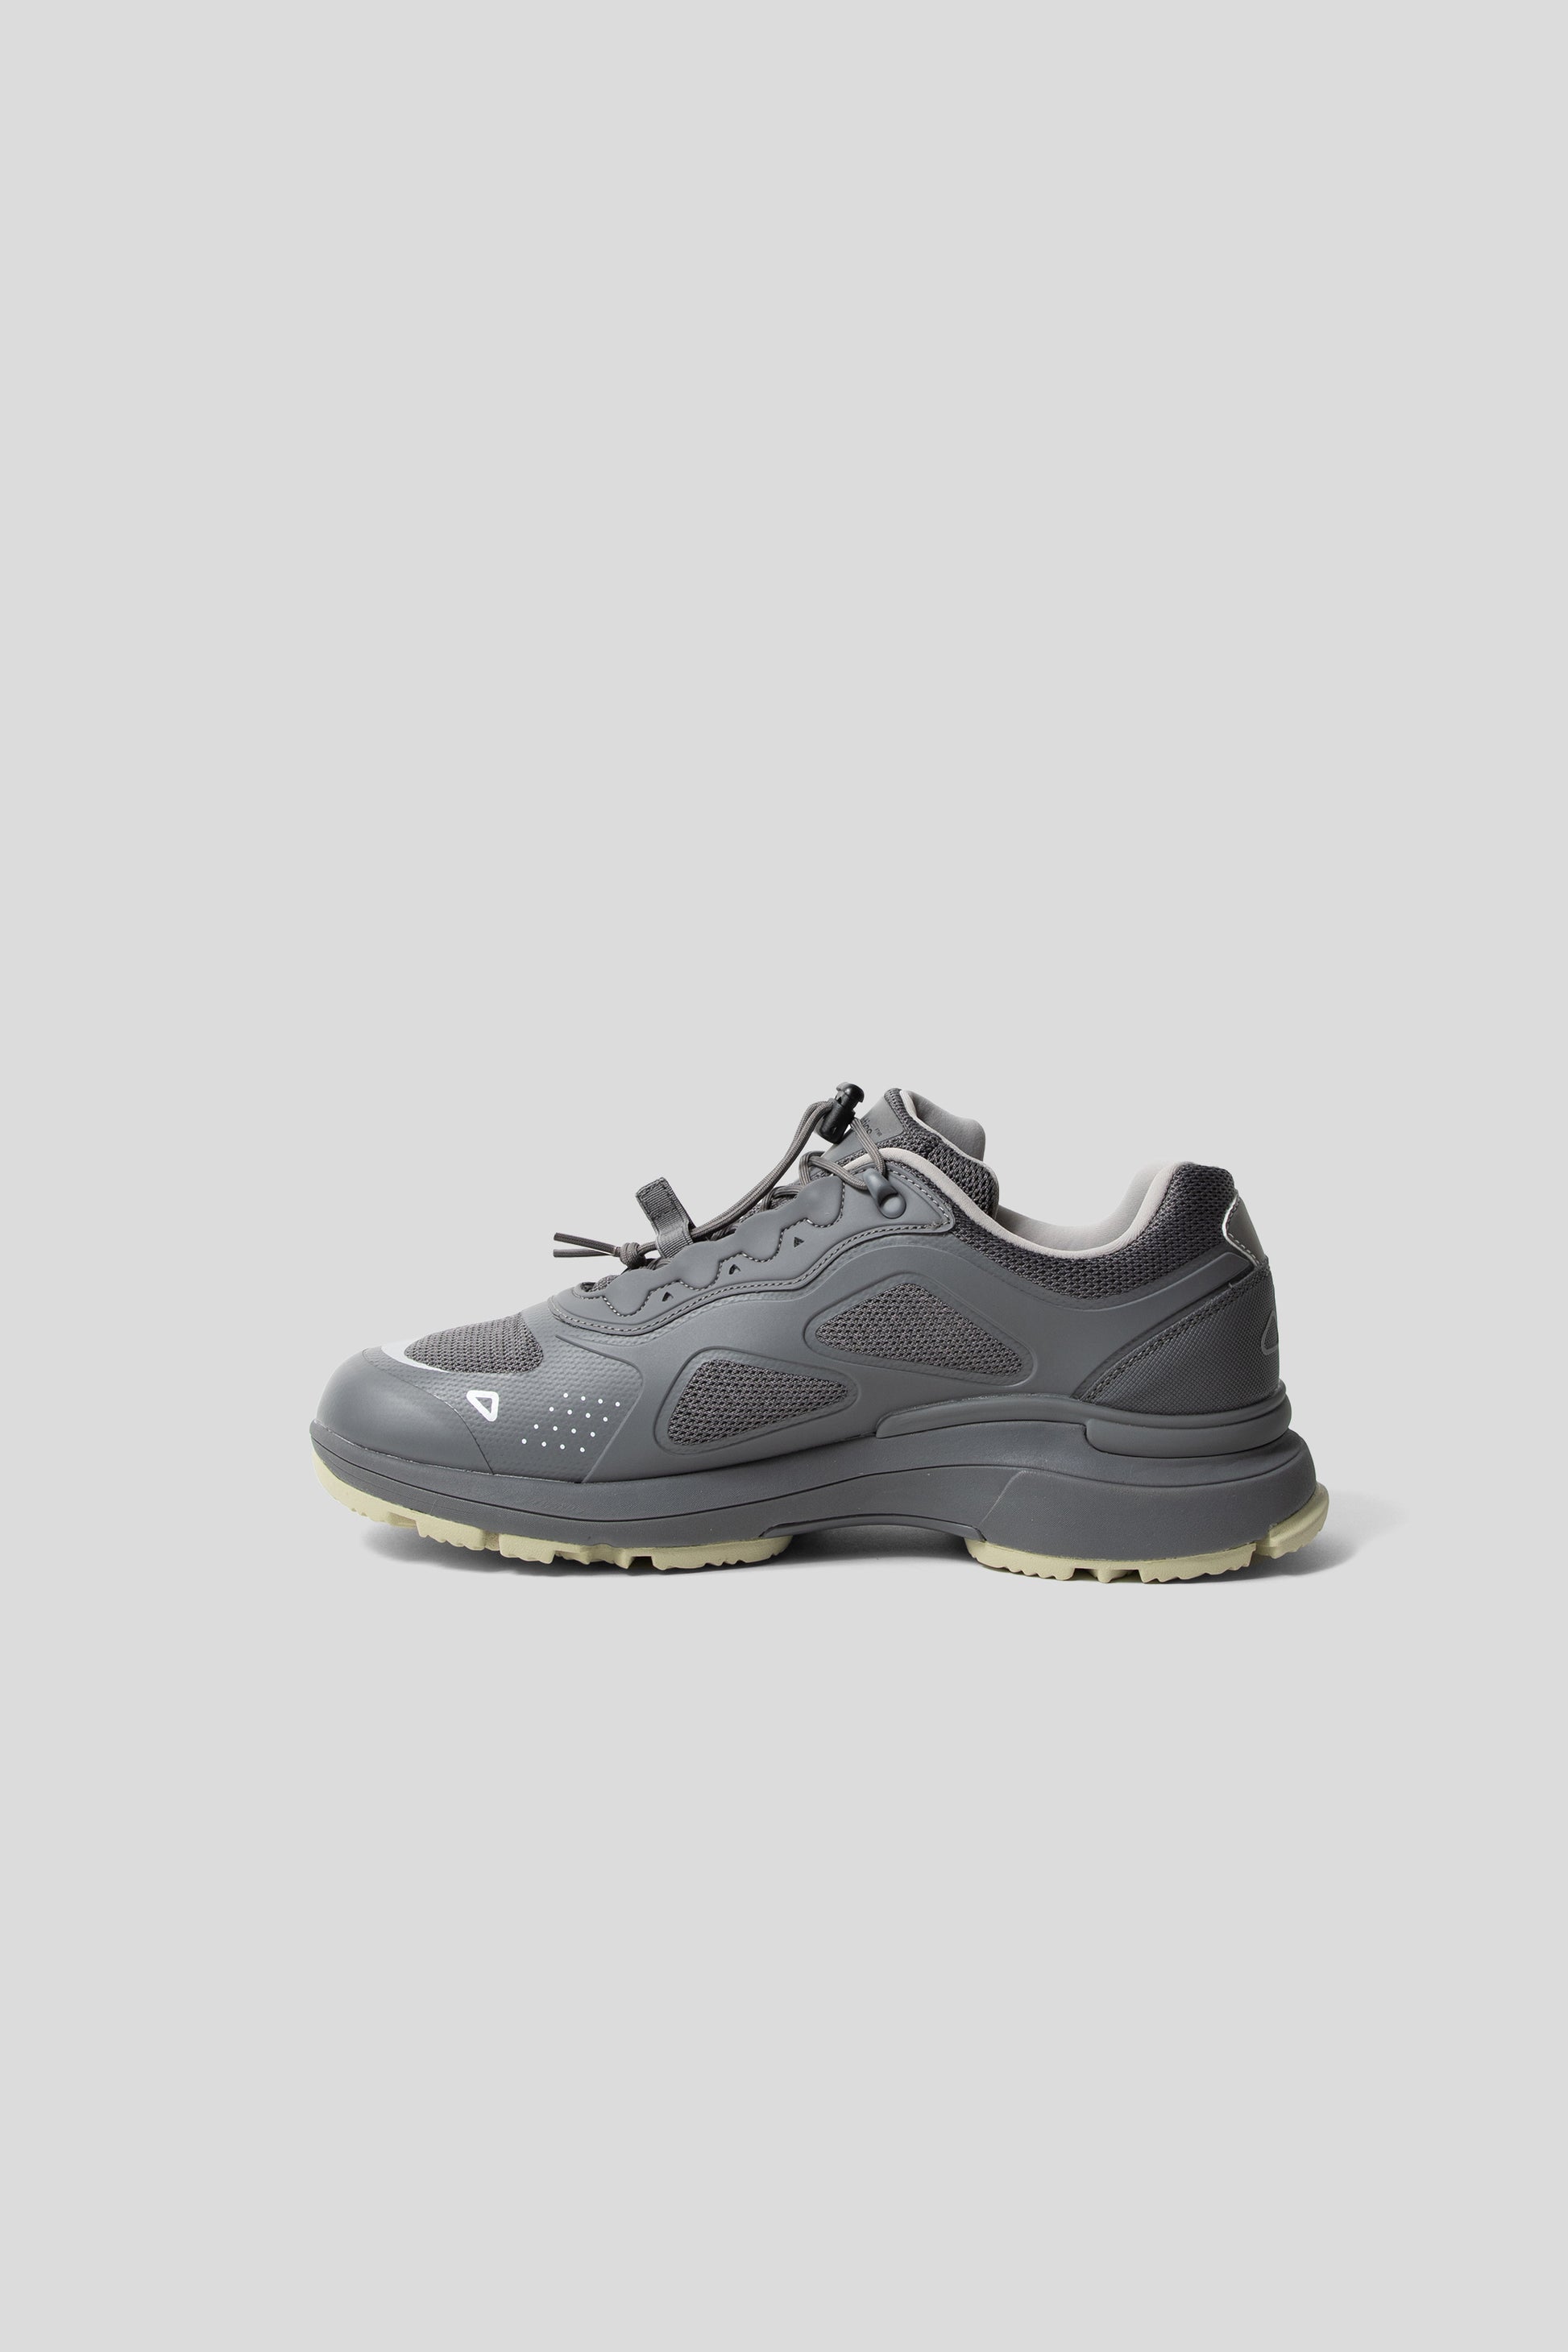 Athletics FTWR One 2 Waterstop Low in the Forest Fog colourway.